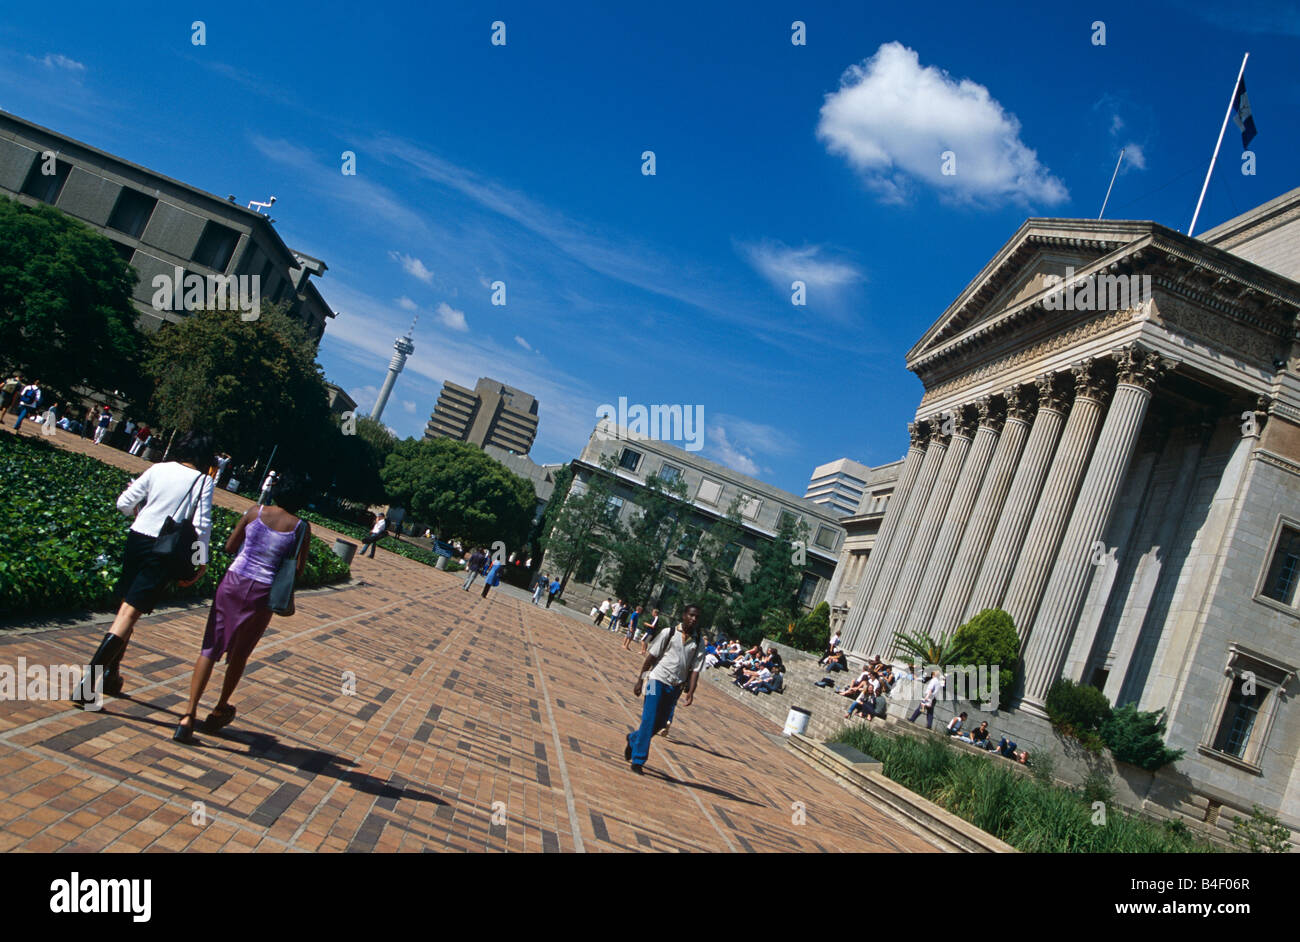 University of Witwatersrand, Johannesburg, South Africa Stock Photo